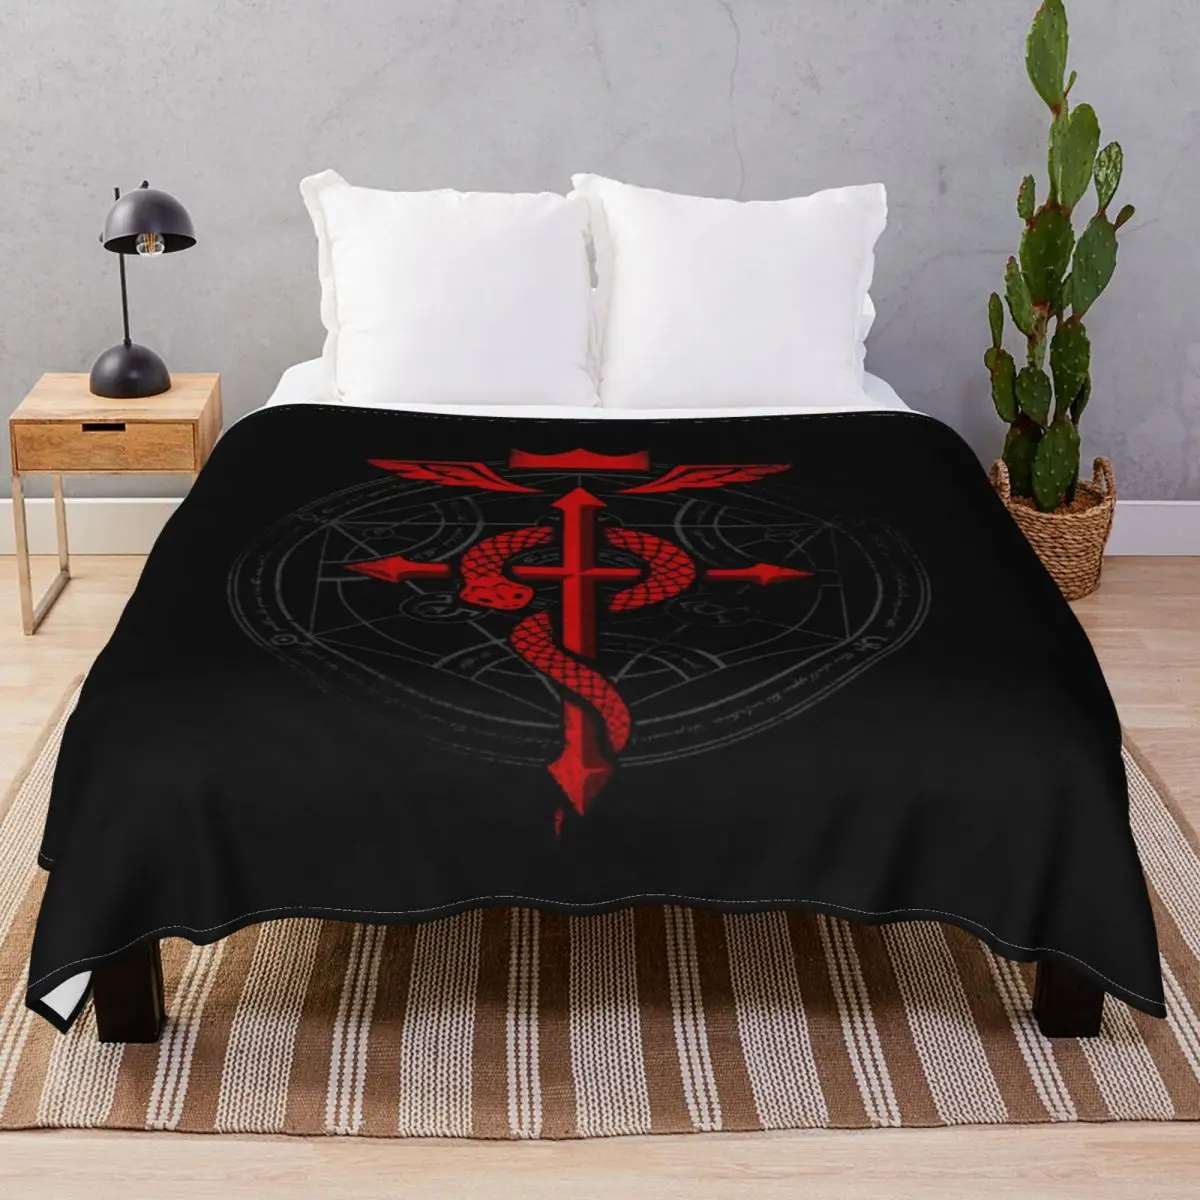 Fullmetal Alchemist Flamel Blanket Flannel All Season Portable Throw Blankets for Bed Home Couch Camp Cinema